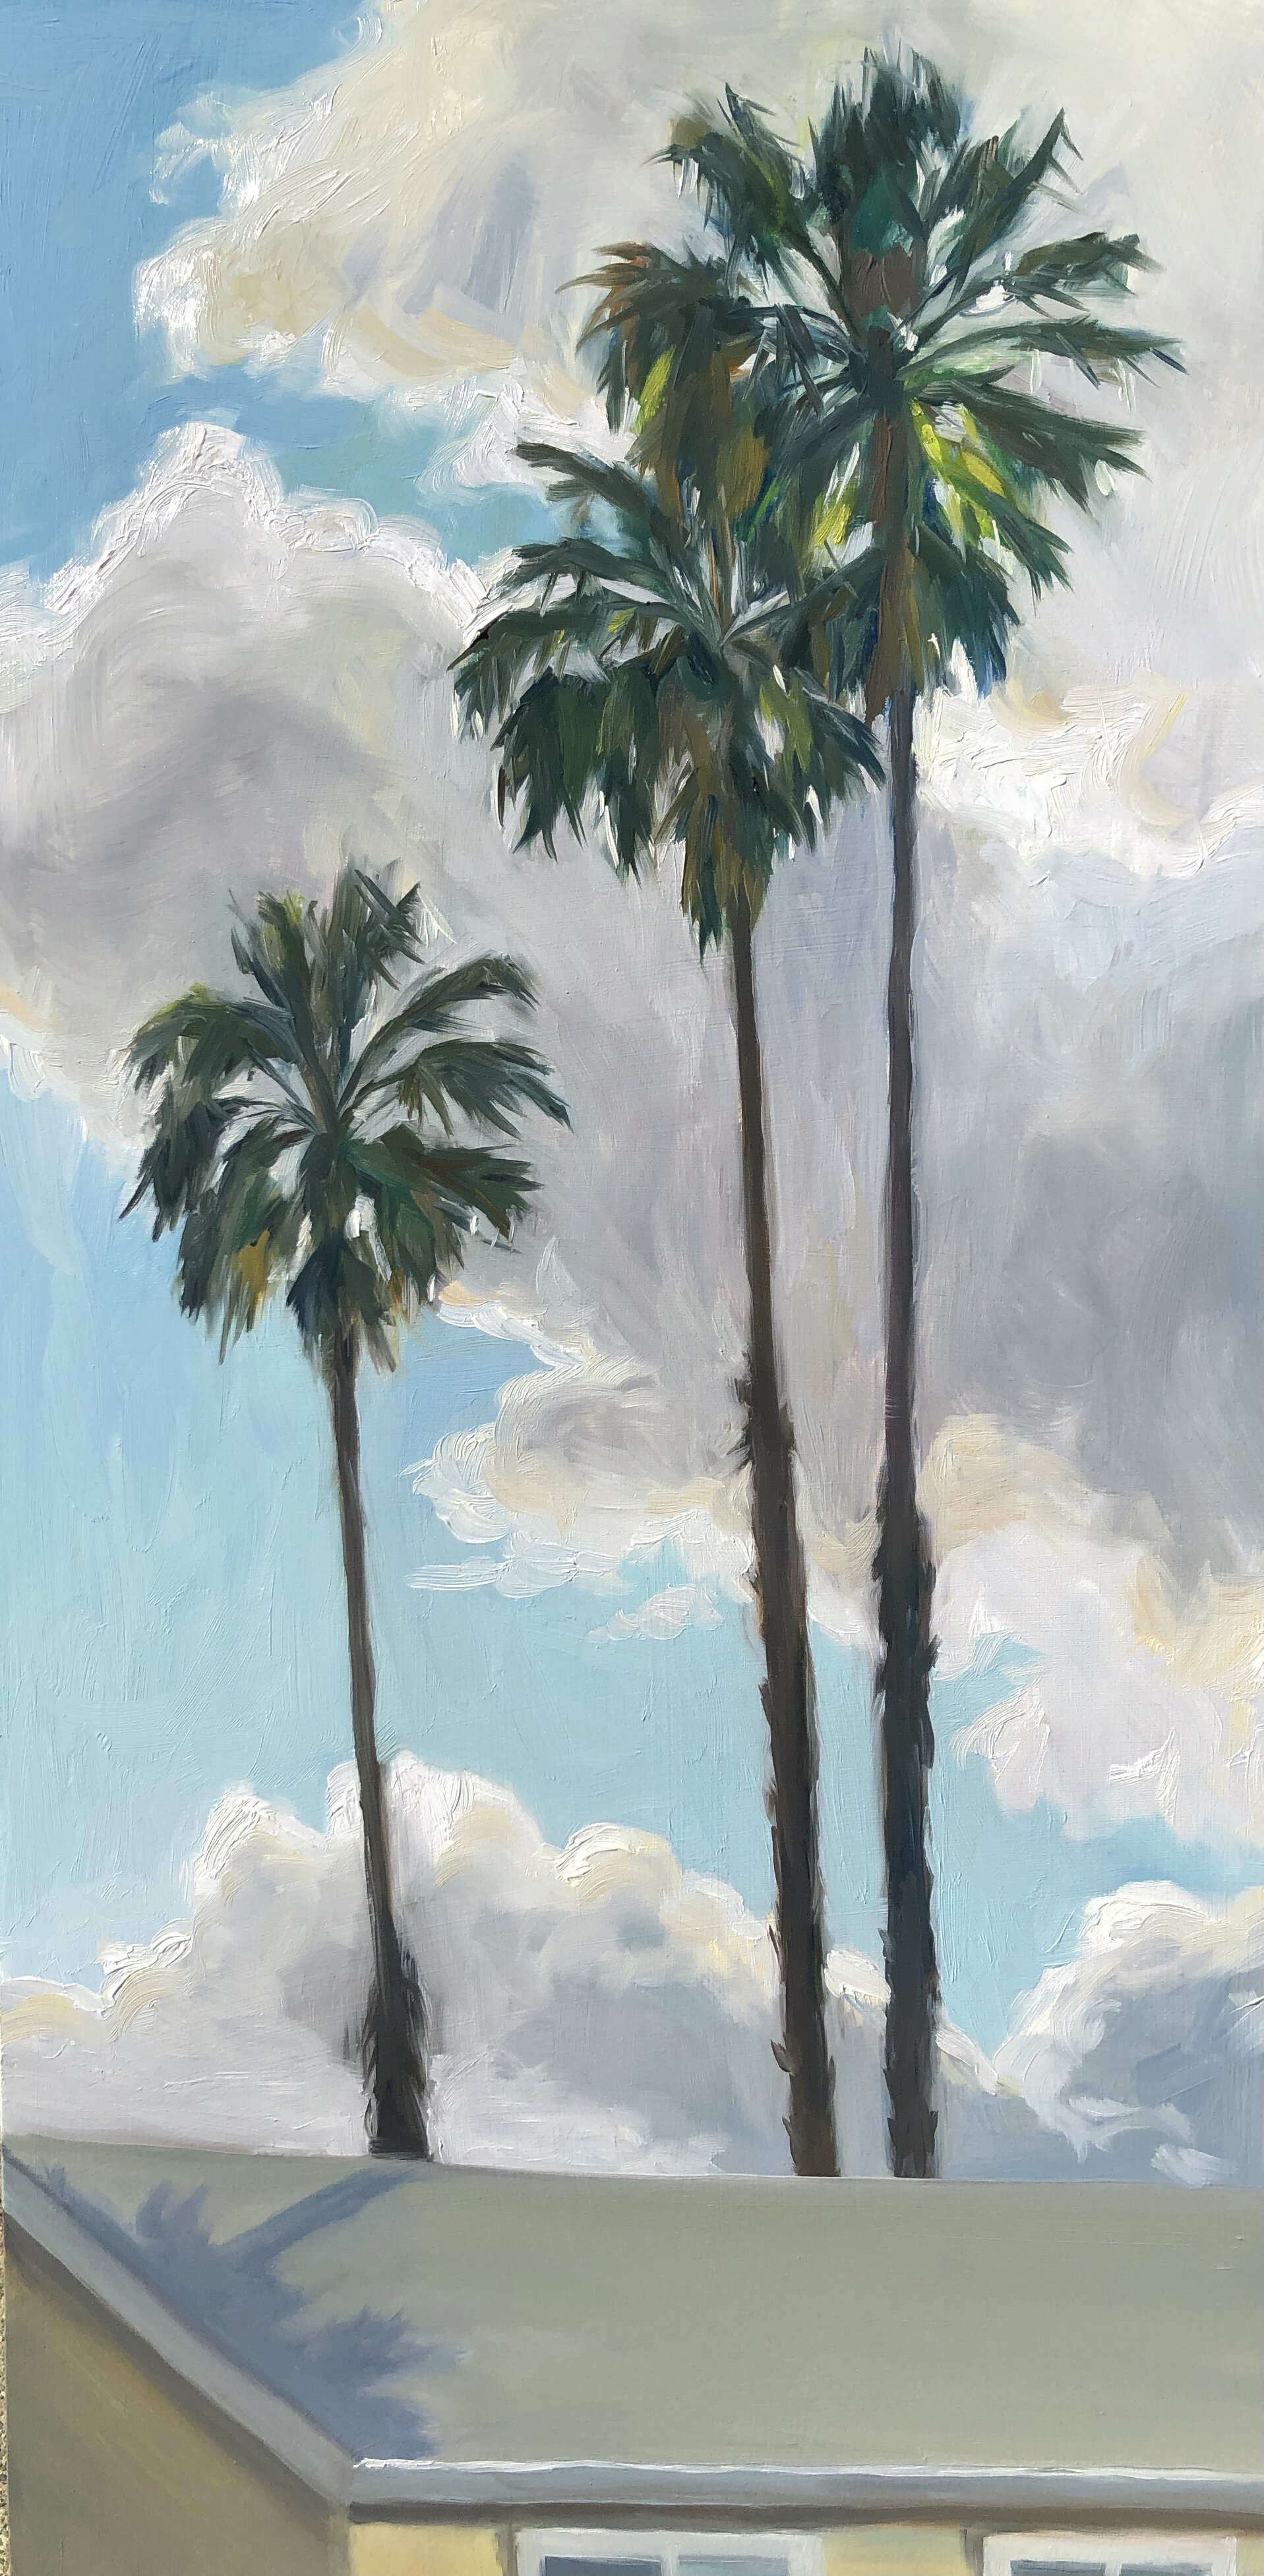 Rainclouds and Palms by Heather Martin